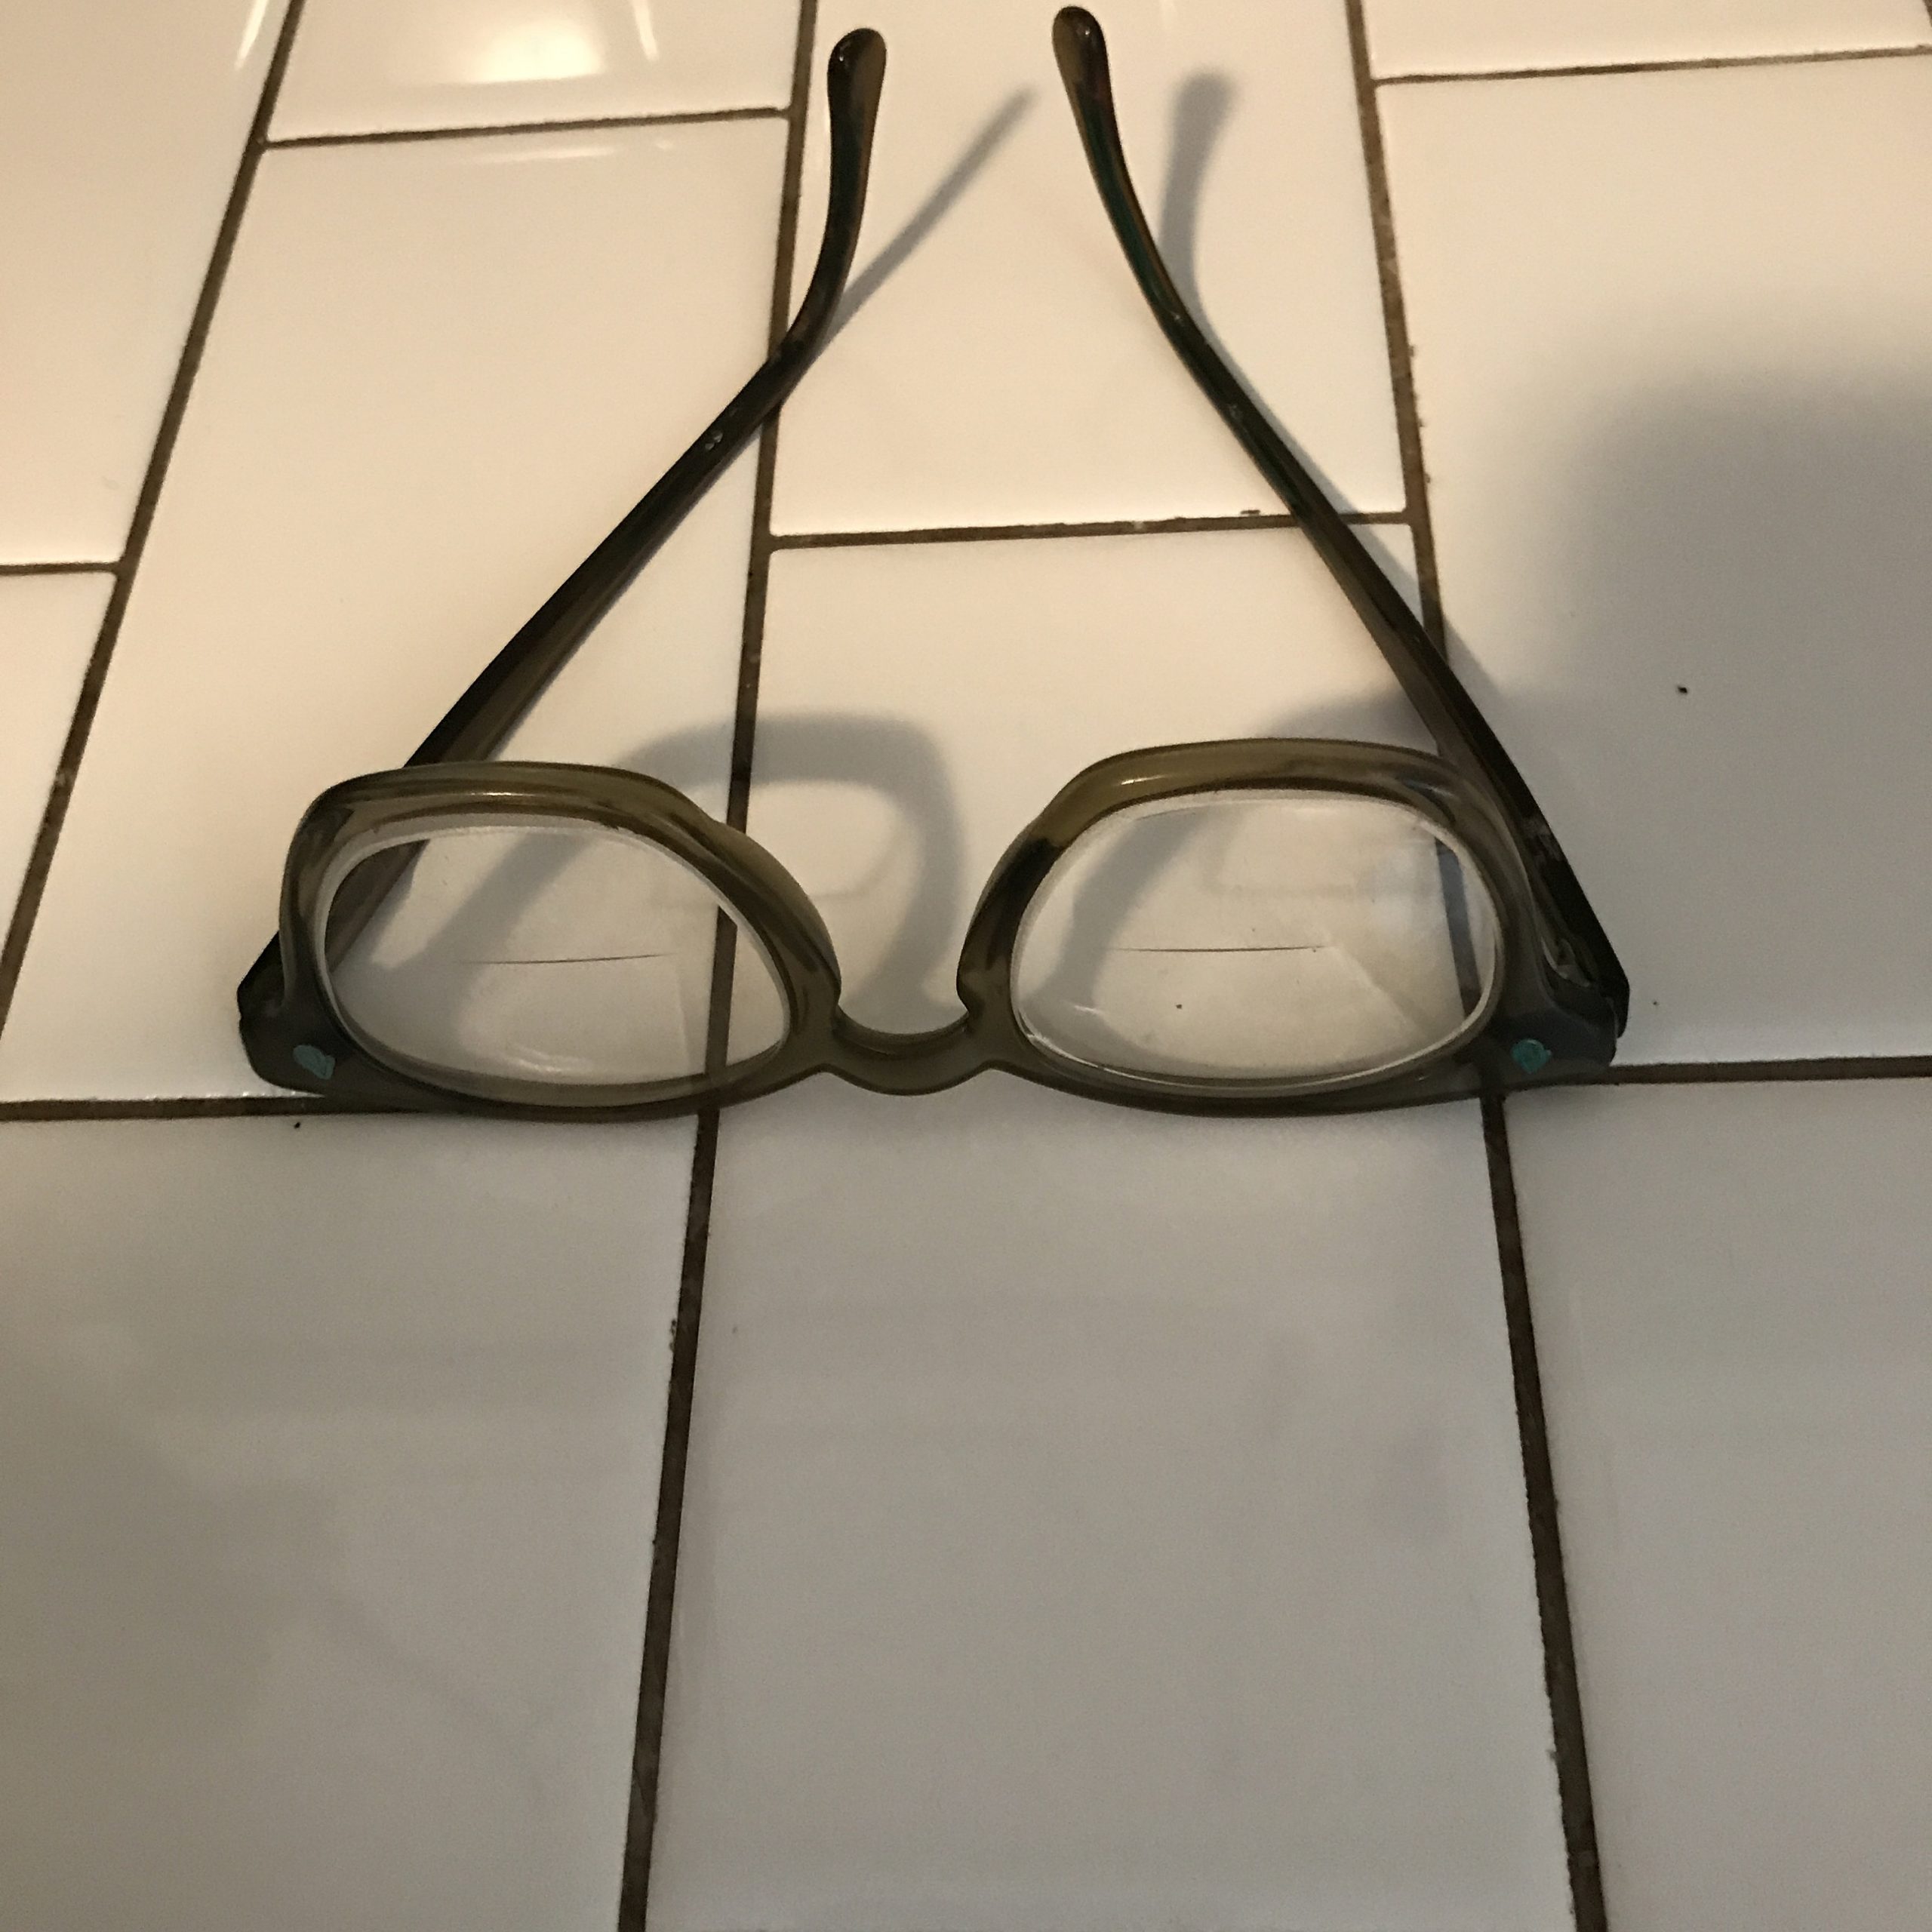 Vintage eyeglasses right out of the 1950's movie theater prop collectible  display office diner mid century atomic hipster mod – Carol's True Vintage  and Antiques